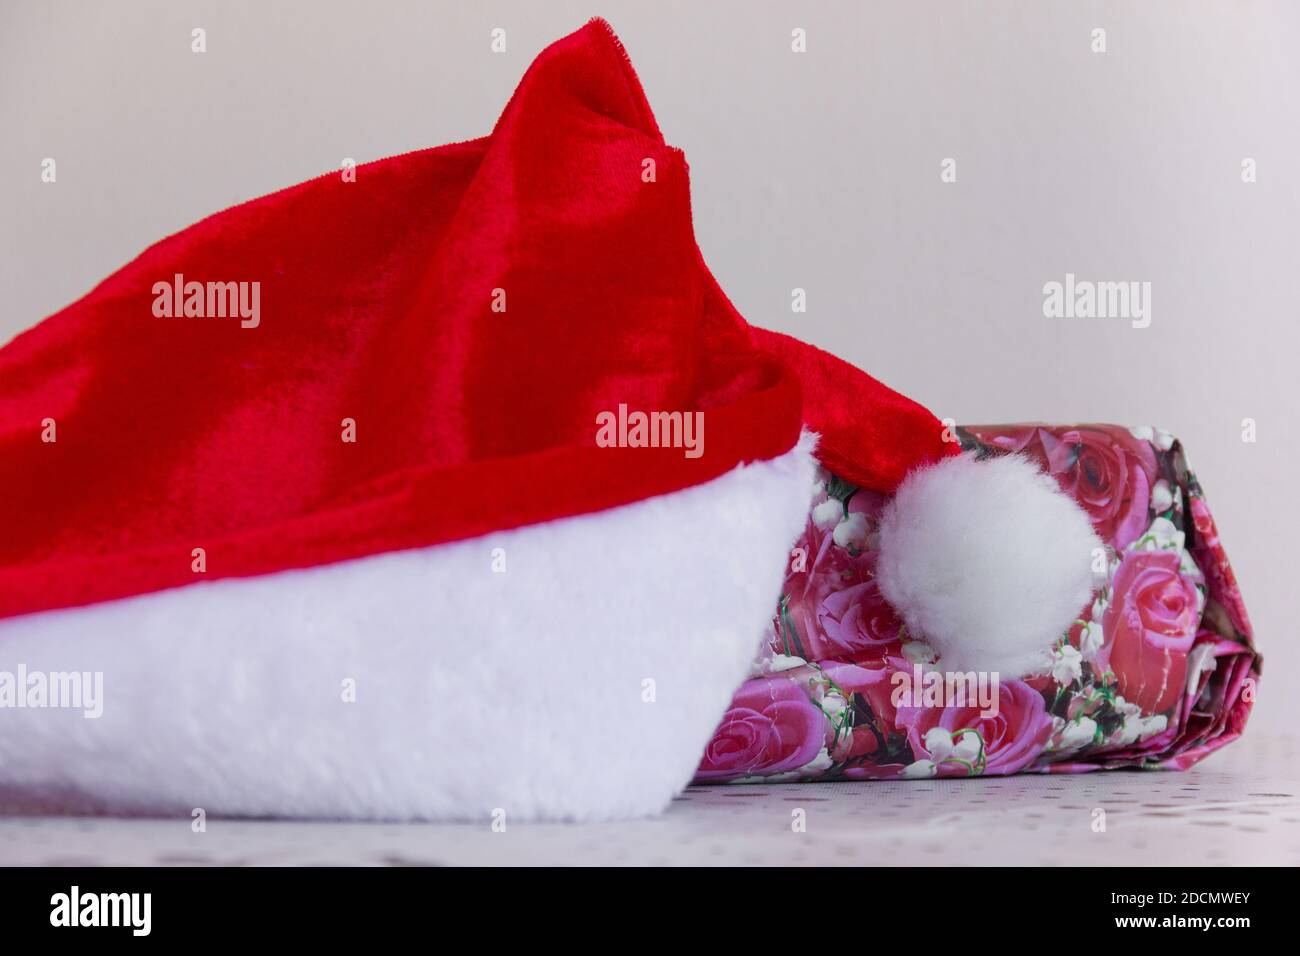 Santa red hat by gift with floral wrap. Christmas holiday season present, invisible friend, generosity concepts Stock Photo